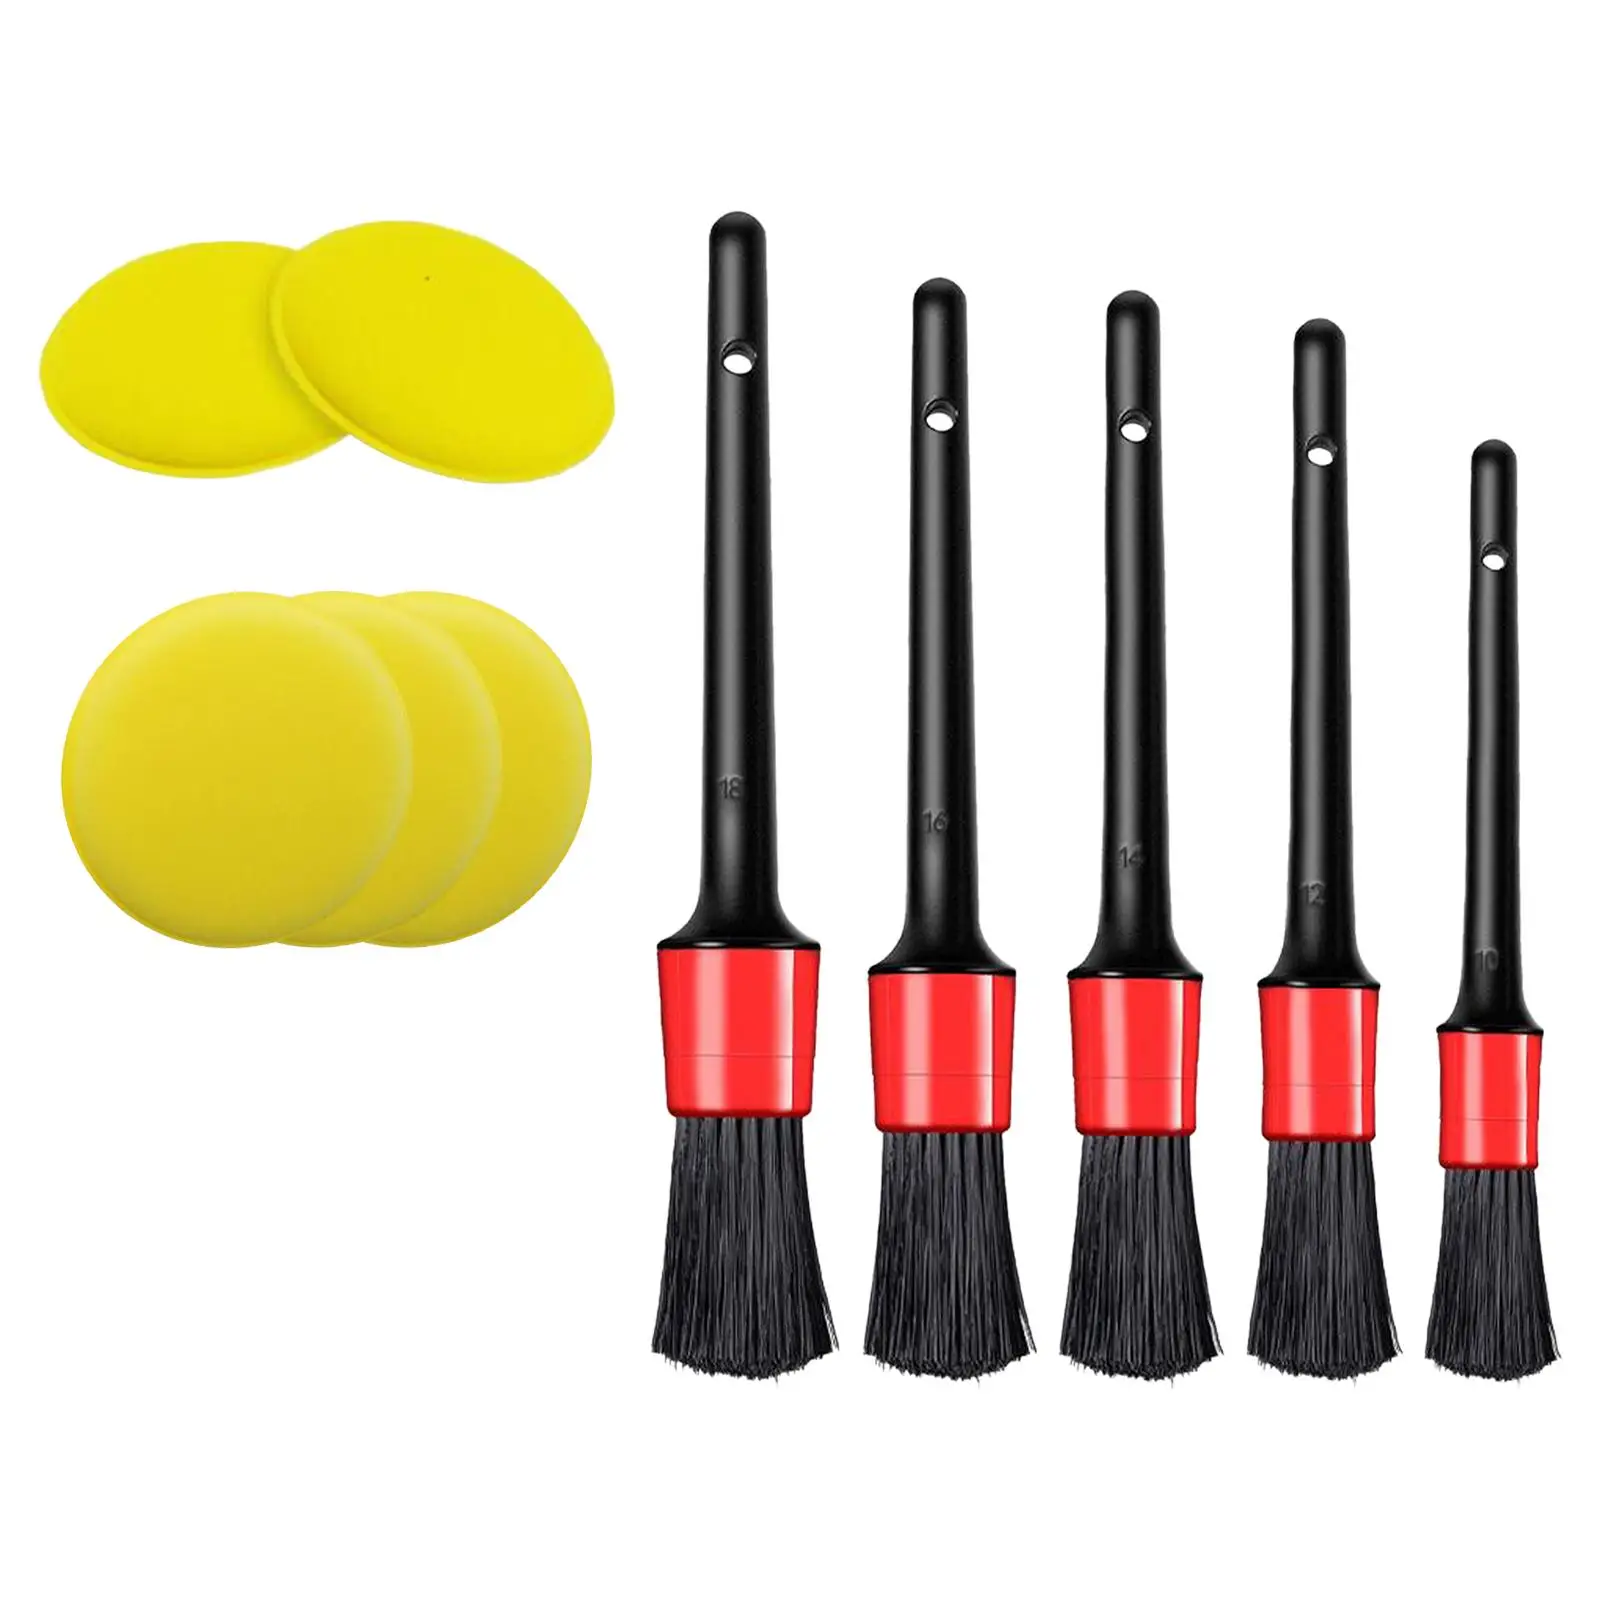 

5 Pieces Car Detailing Brush Set Multi Purpose Detail Cleaner Brushes Fit for Upholstery Leather Motorcycle Automotive Lug Nut